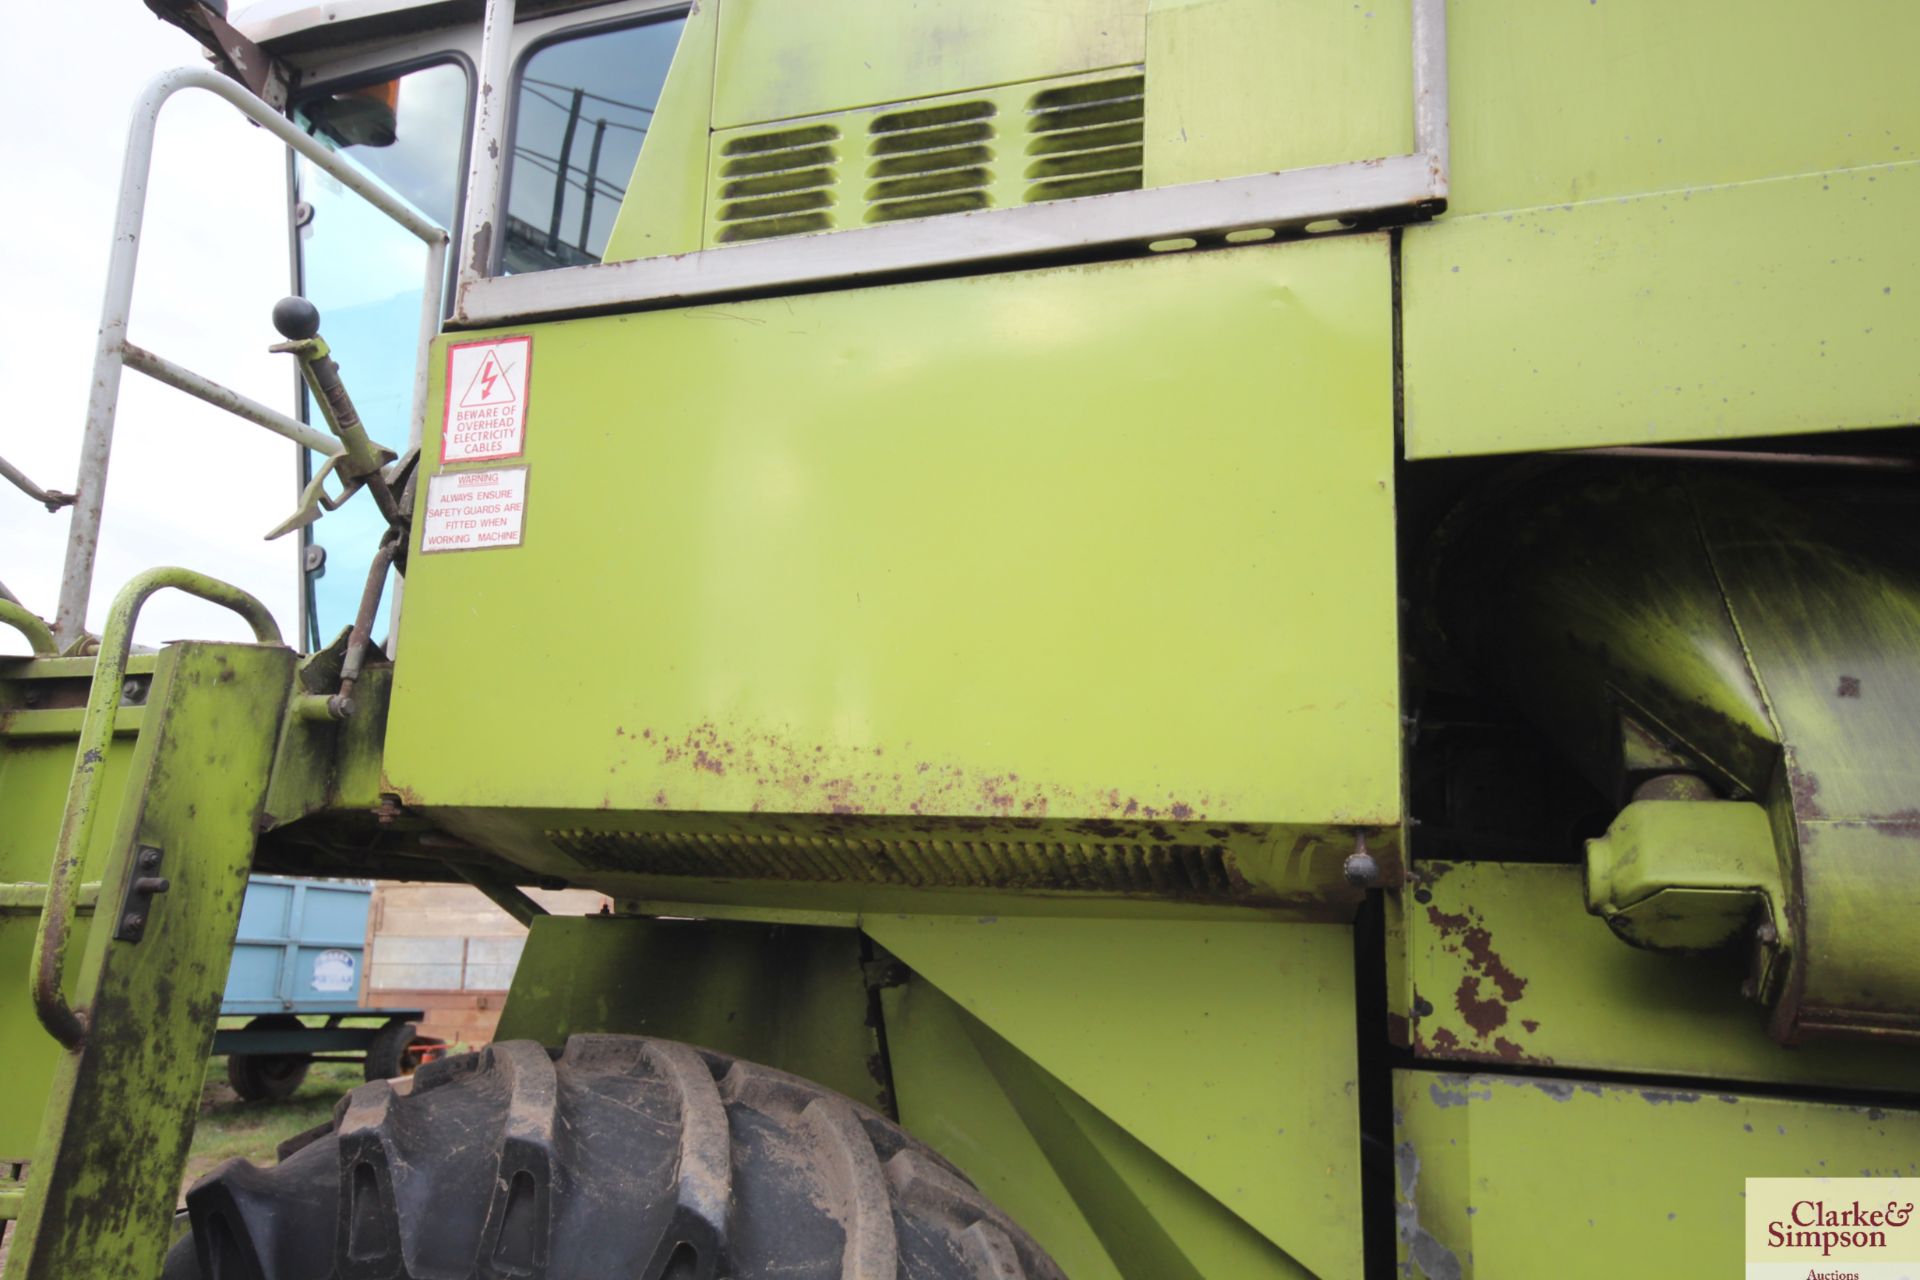 ** UPDATED HOURS ** Claas Dominator 98S combine. Registration E799 APU. Date of first registration - Image 16 of 120